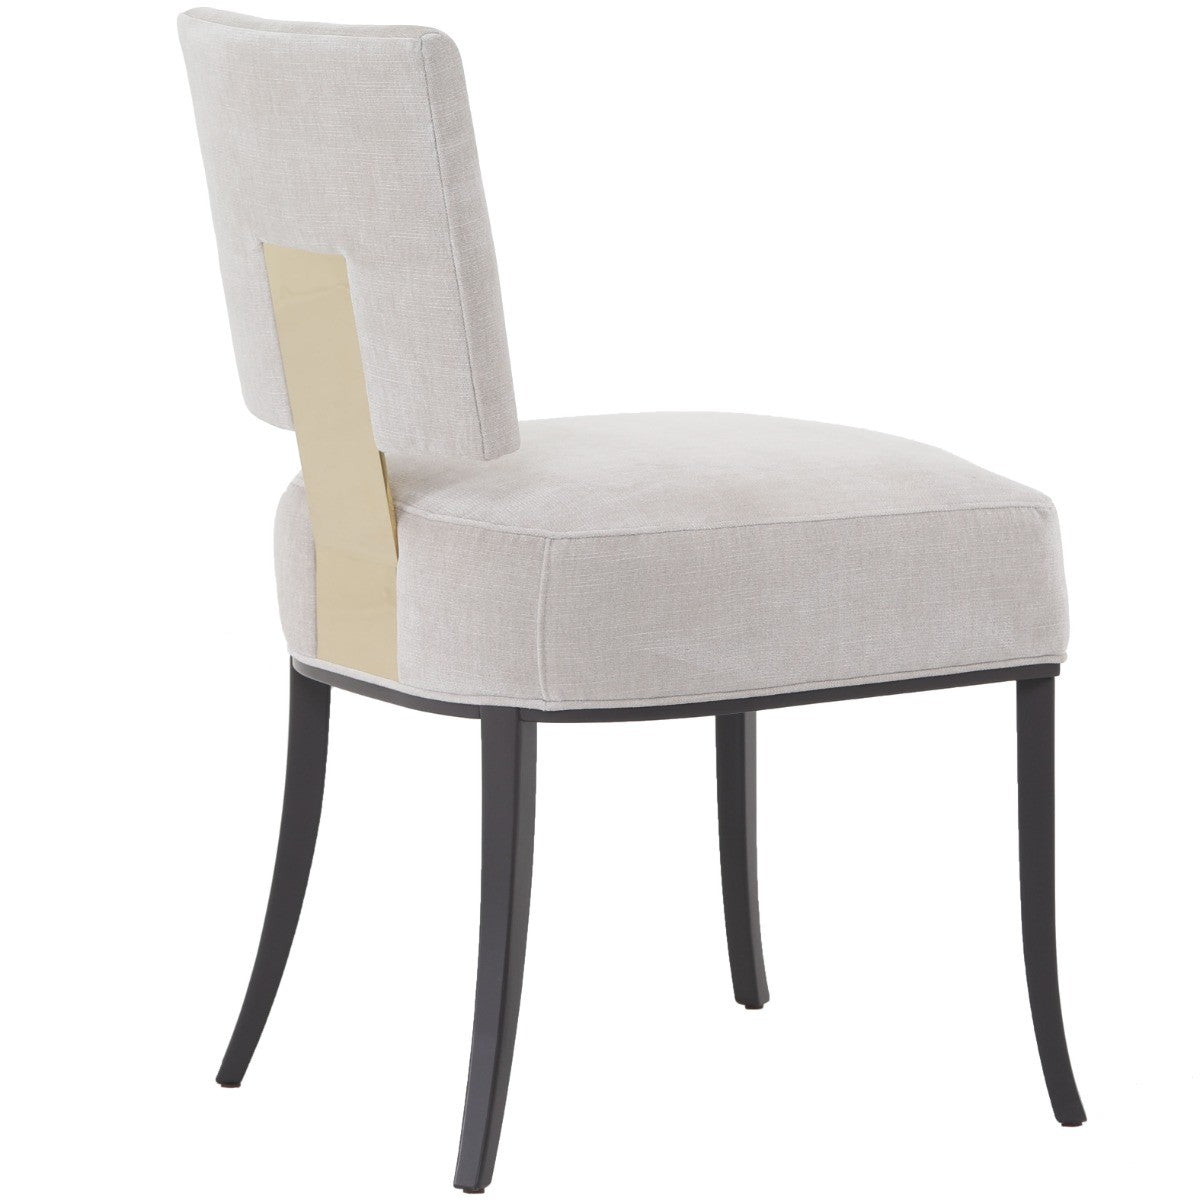 Caracole Classic Reserved Seating Dining Chair